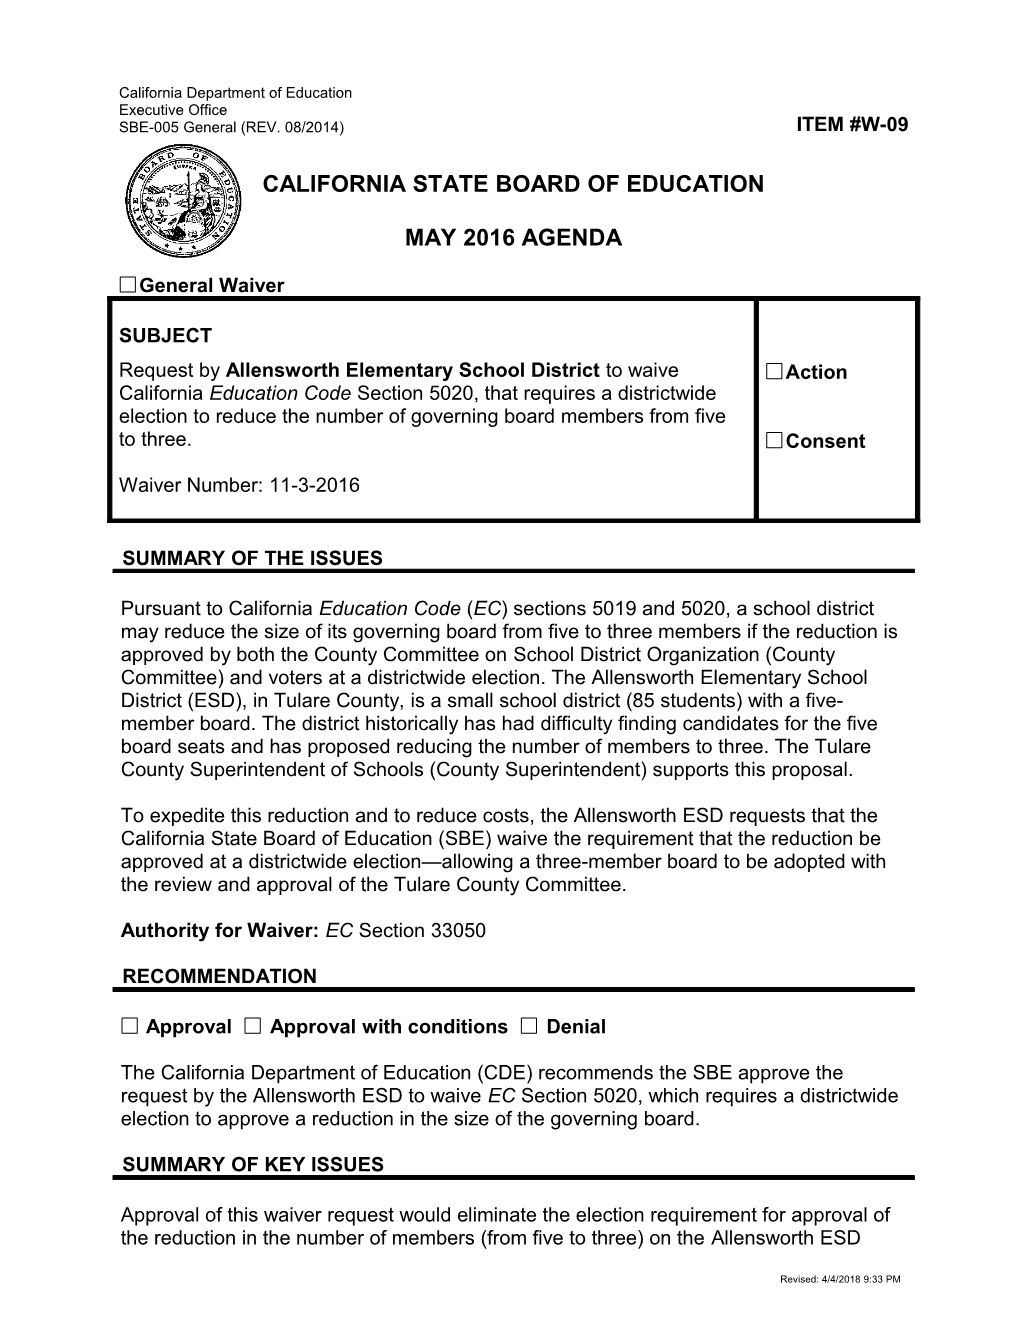 May 2016 Waiver Item W-09 - Meeting Agendas (CA State Board of Education)